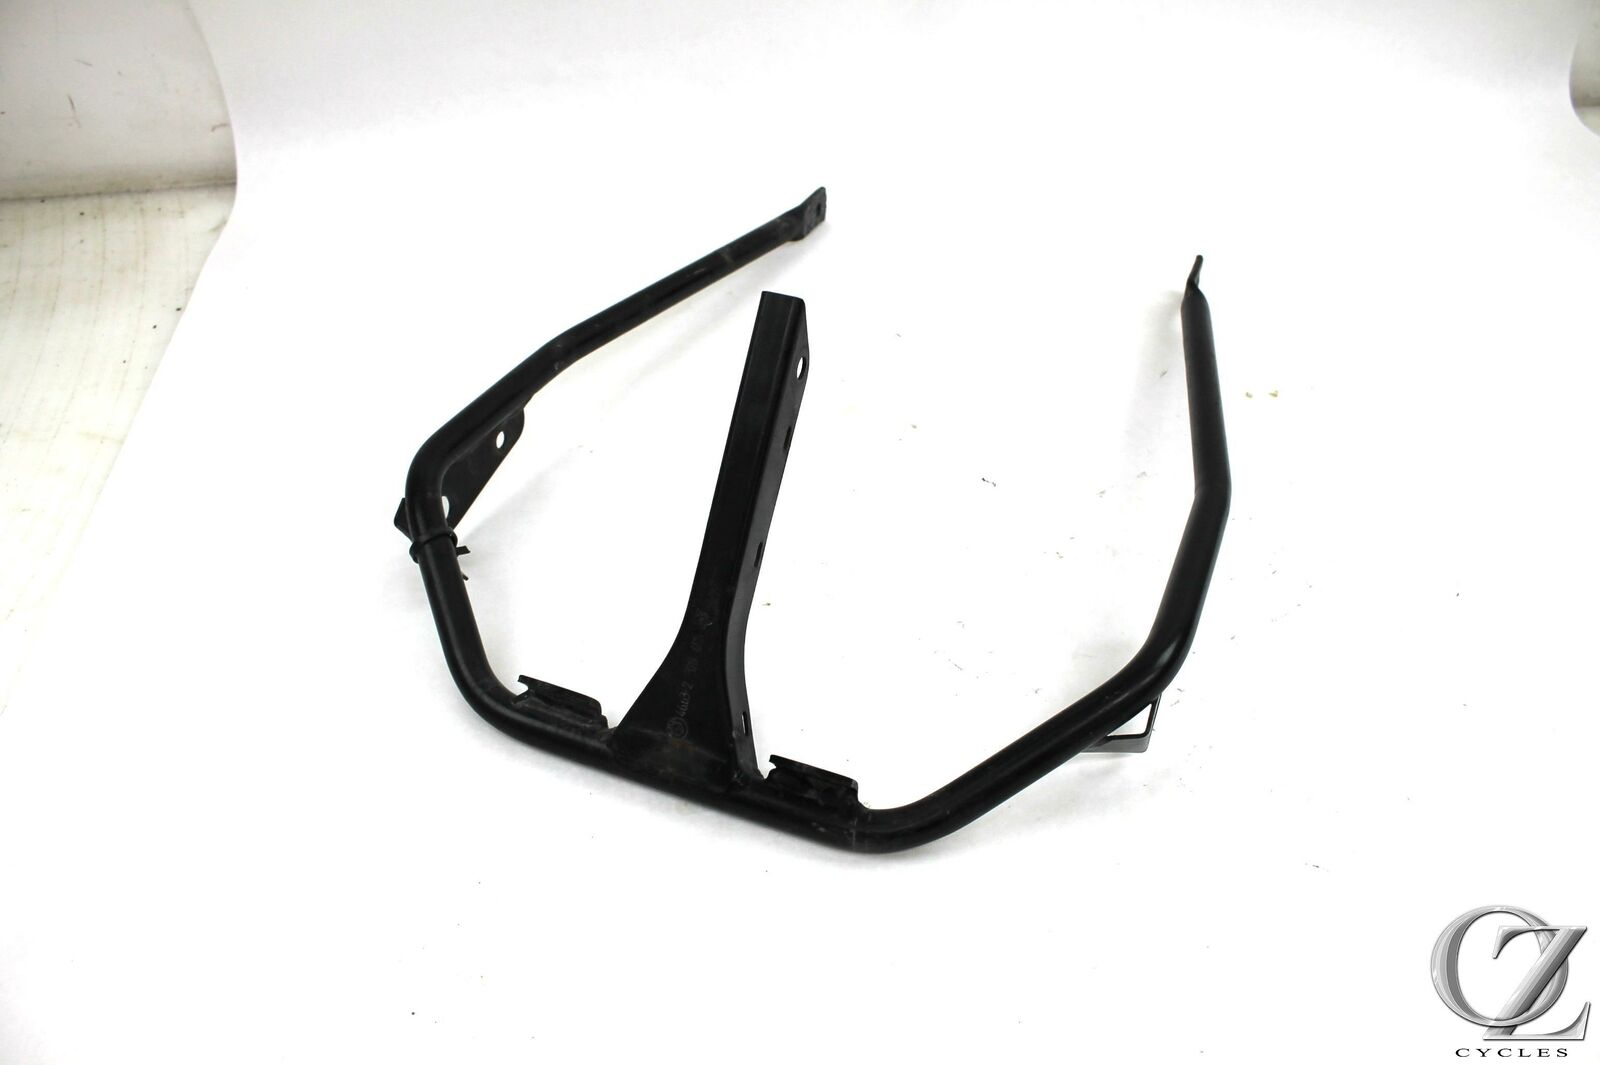 00-04 BMW R1150GS R1150 GS Upper Stay Popular brand in the world Mirror Gauge Brack Popular brand in the world Fairing